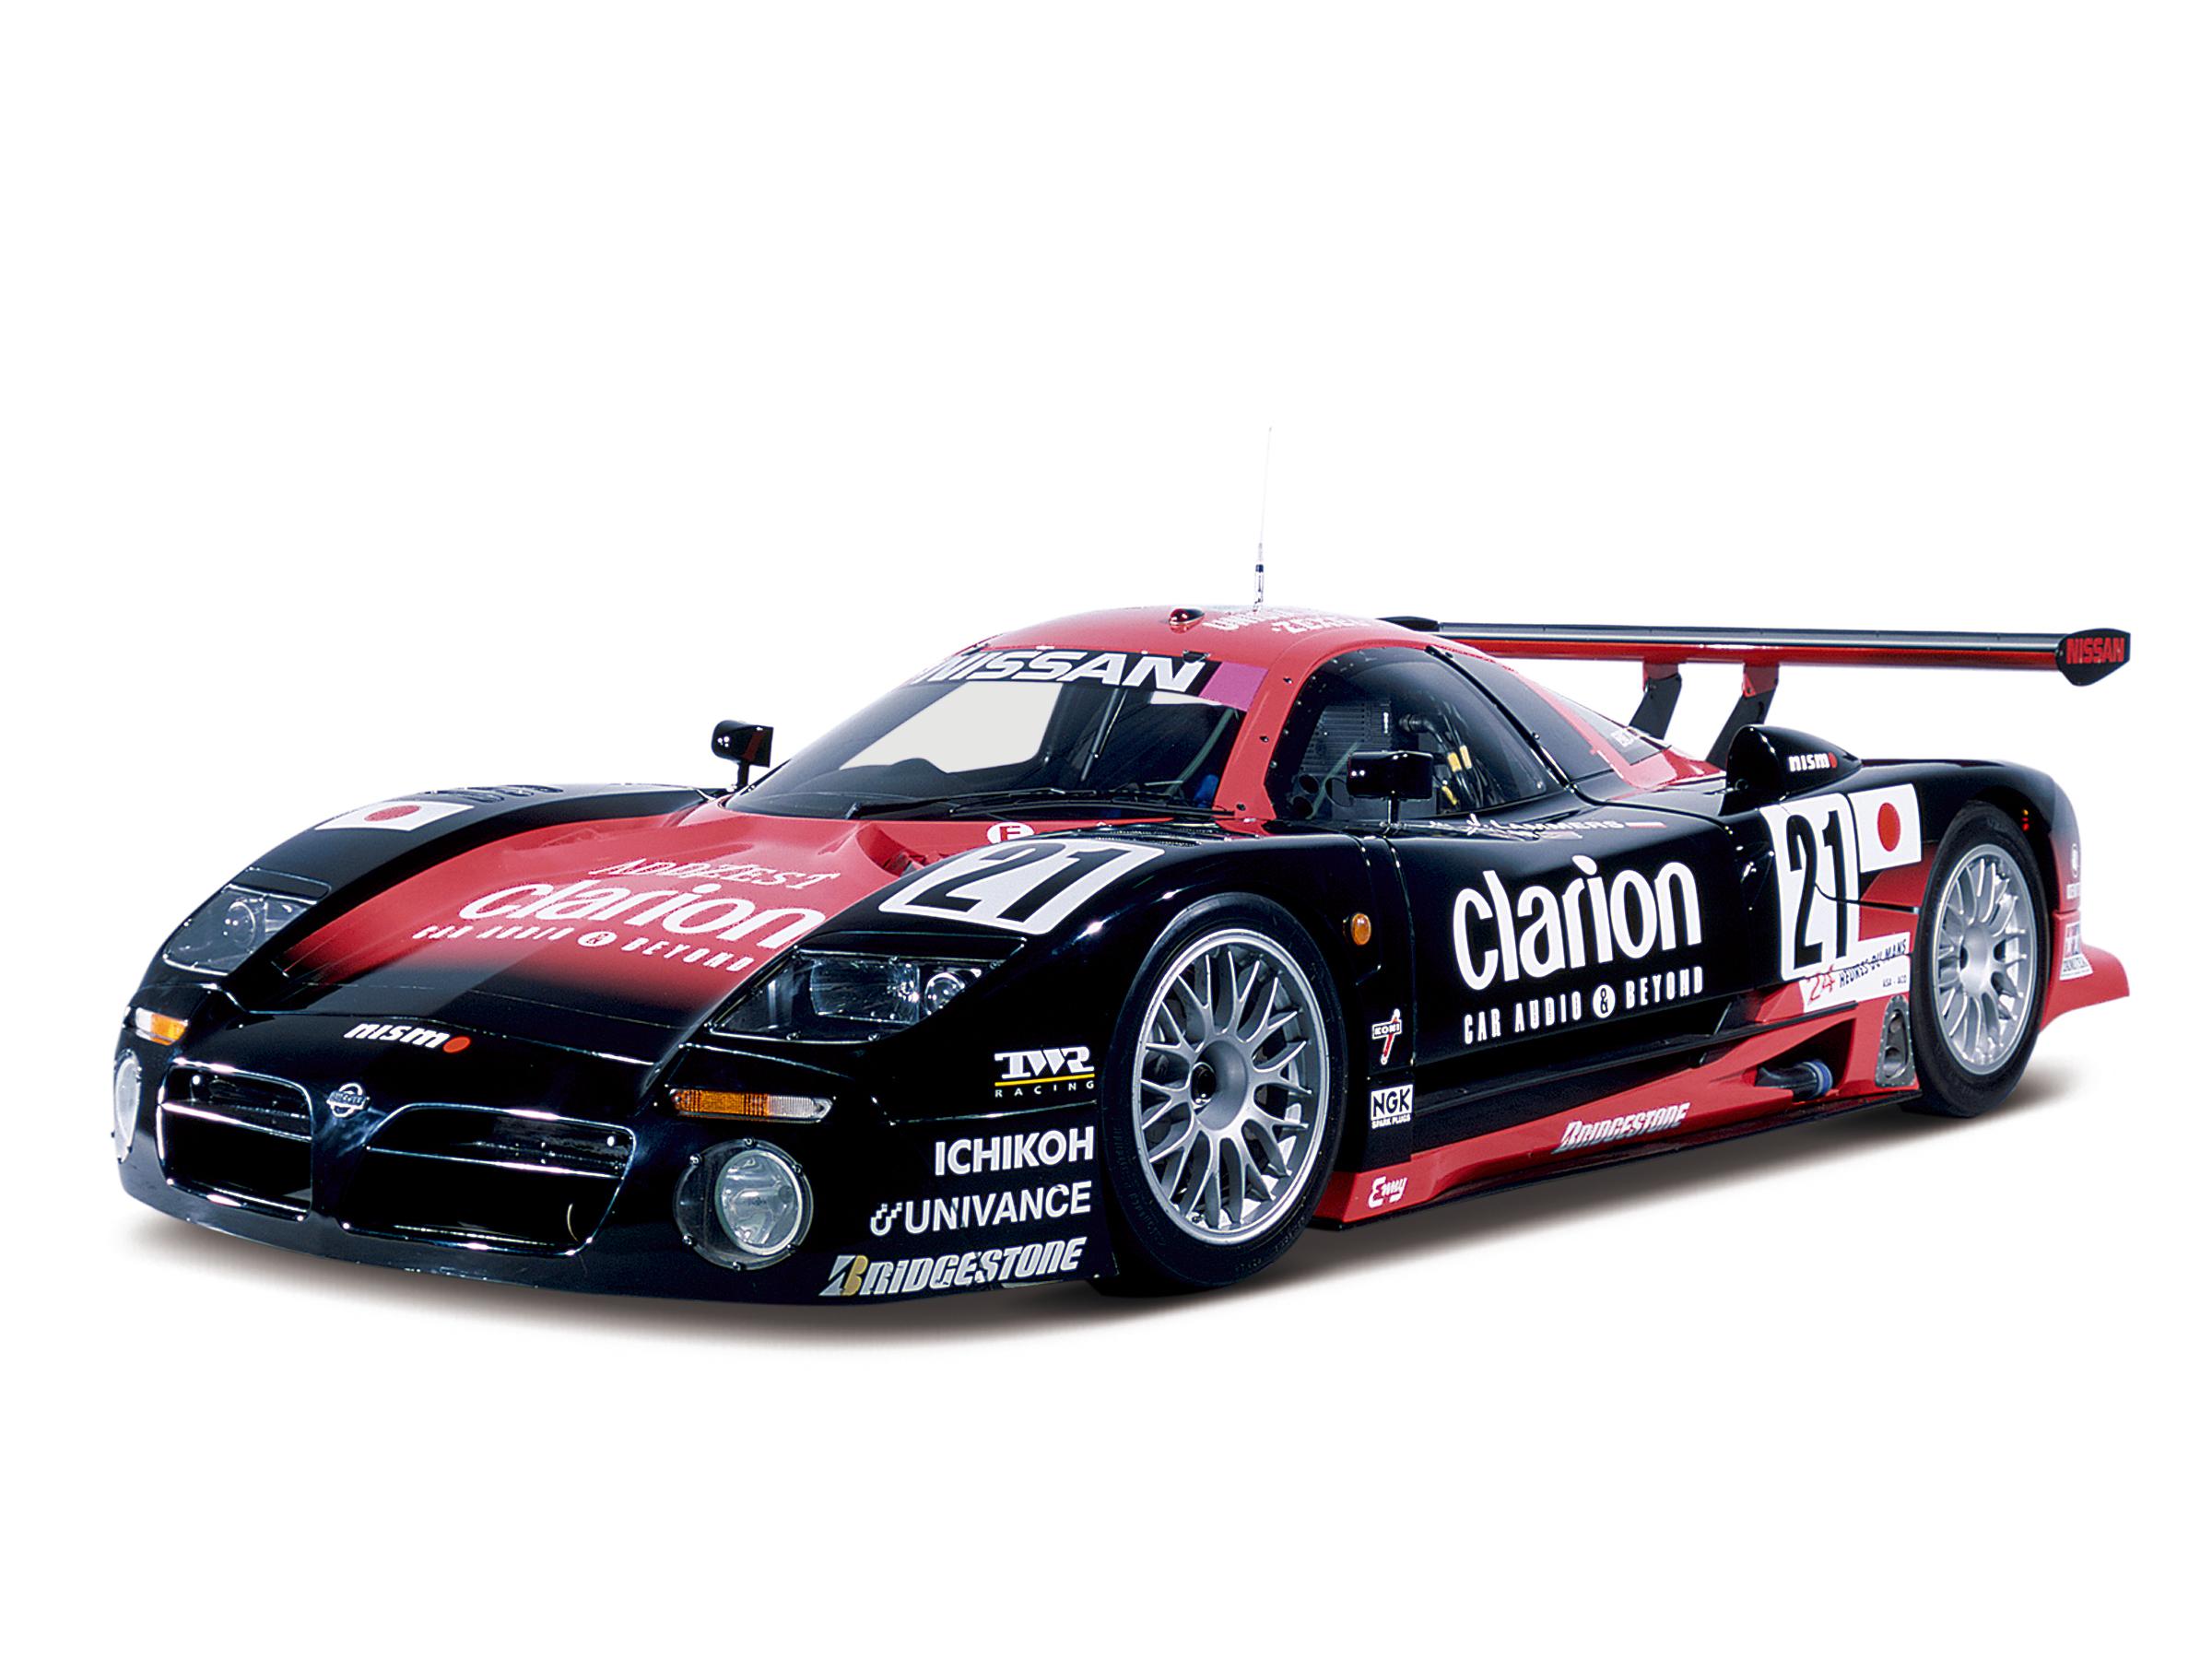 Nissan Heritage Collection R390 Gt1